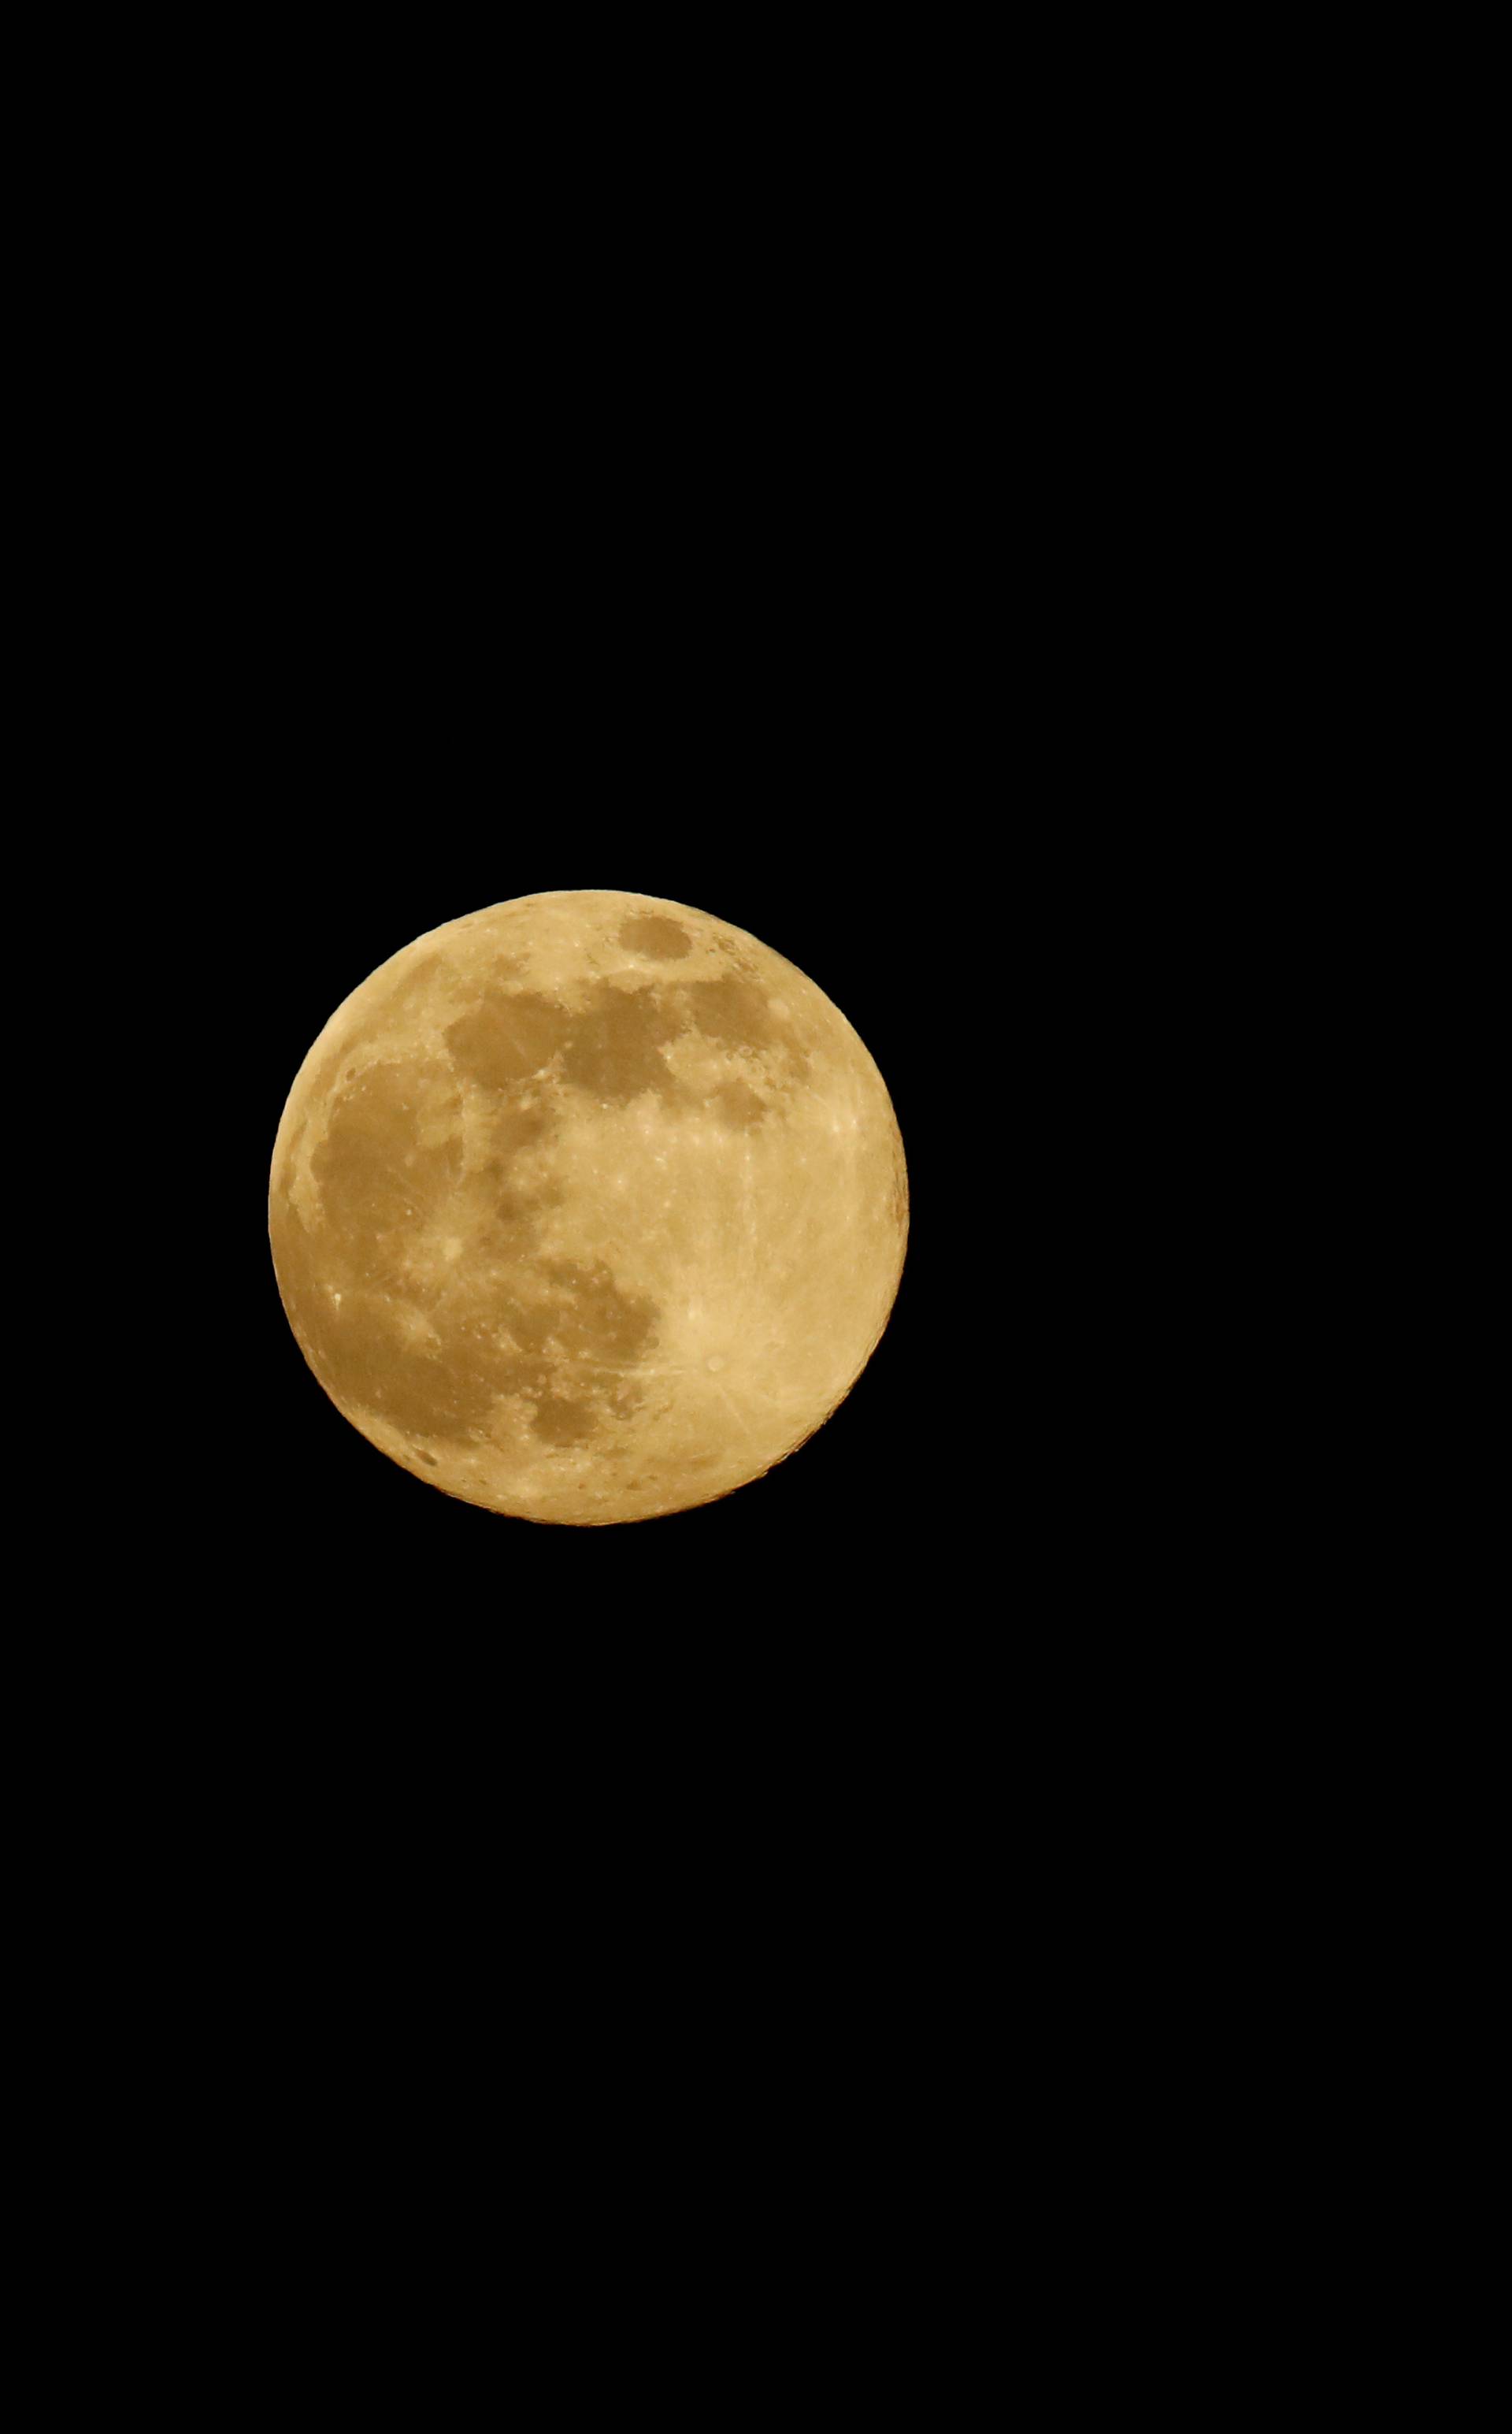 The Supermoon visible over Newtownards